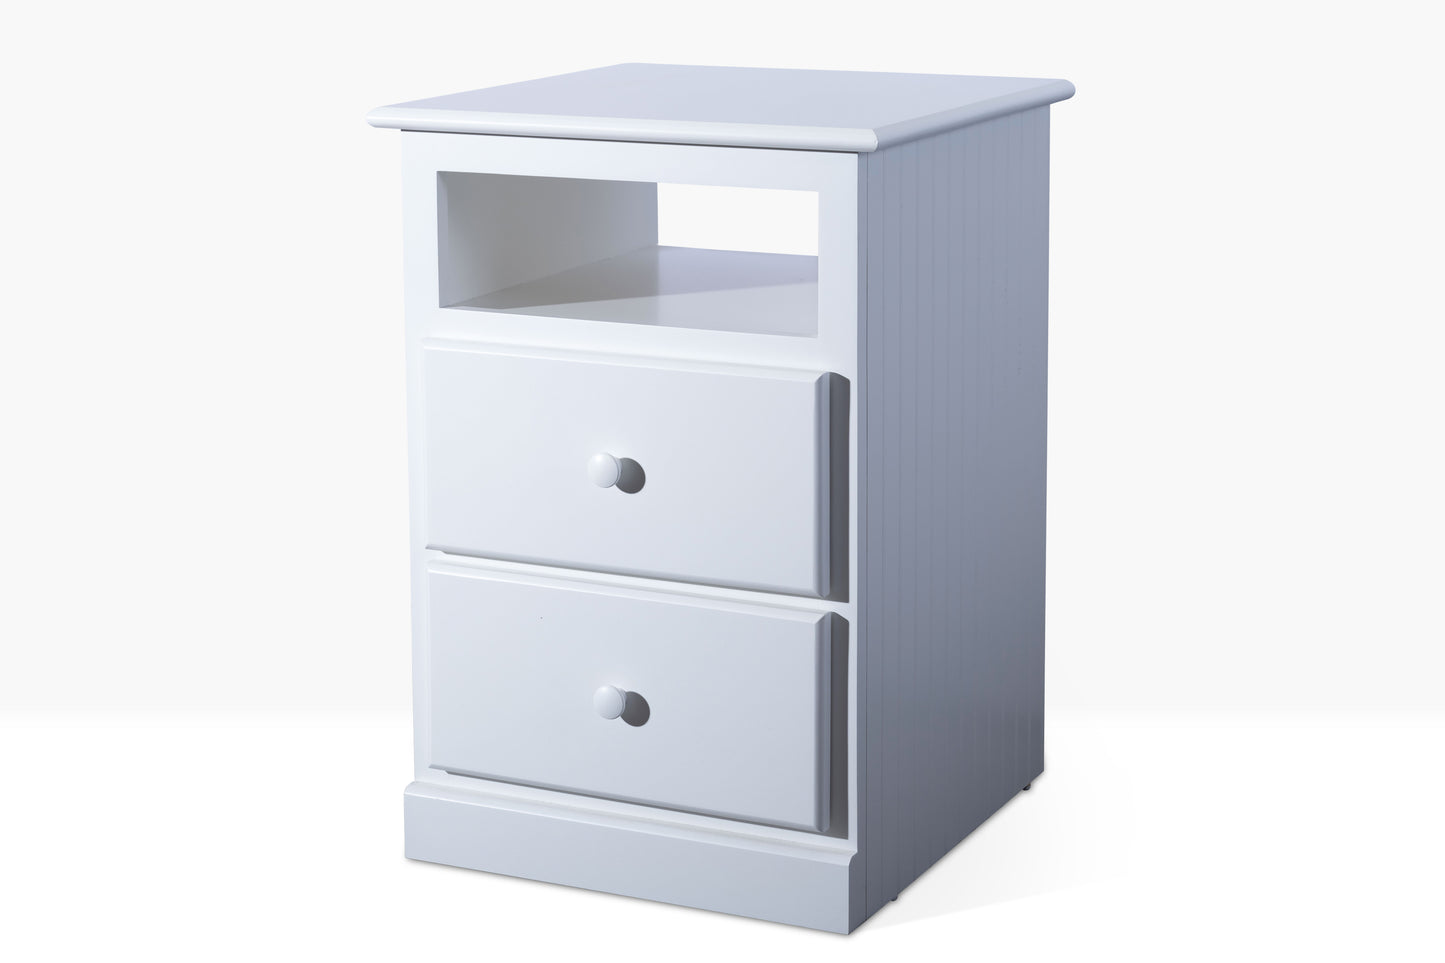 A birch nightstand with two drawers with full extension glides and a single cubby space. It has bead board sides, and is shown in white. Pictured from front angle.